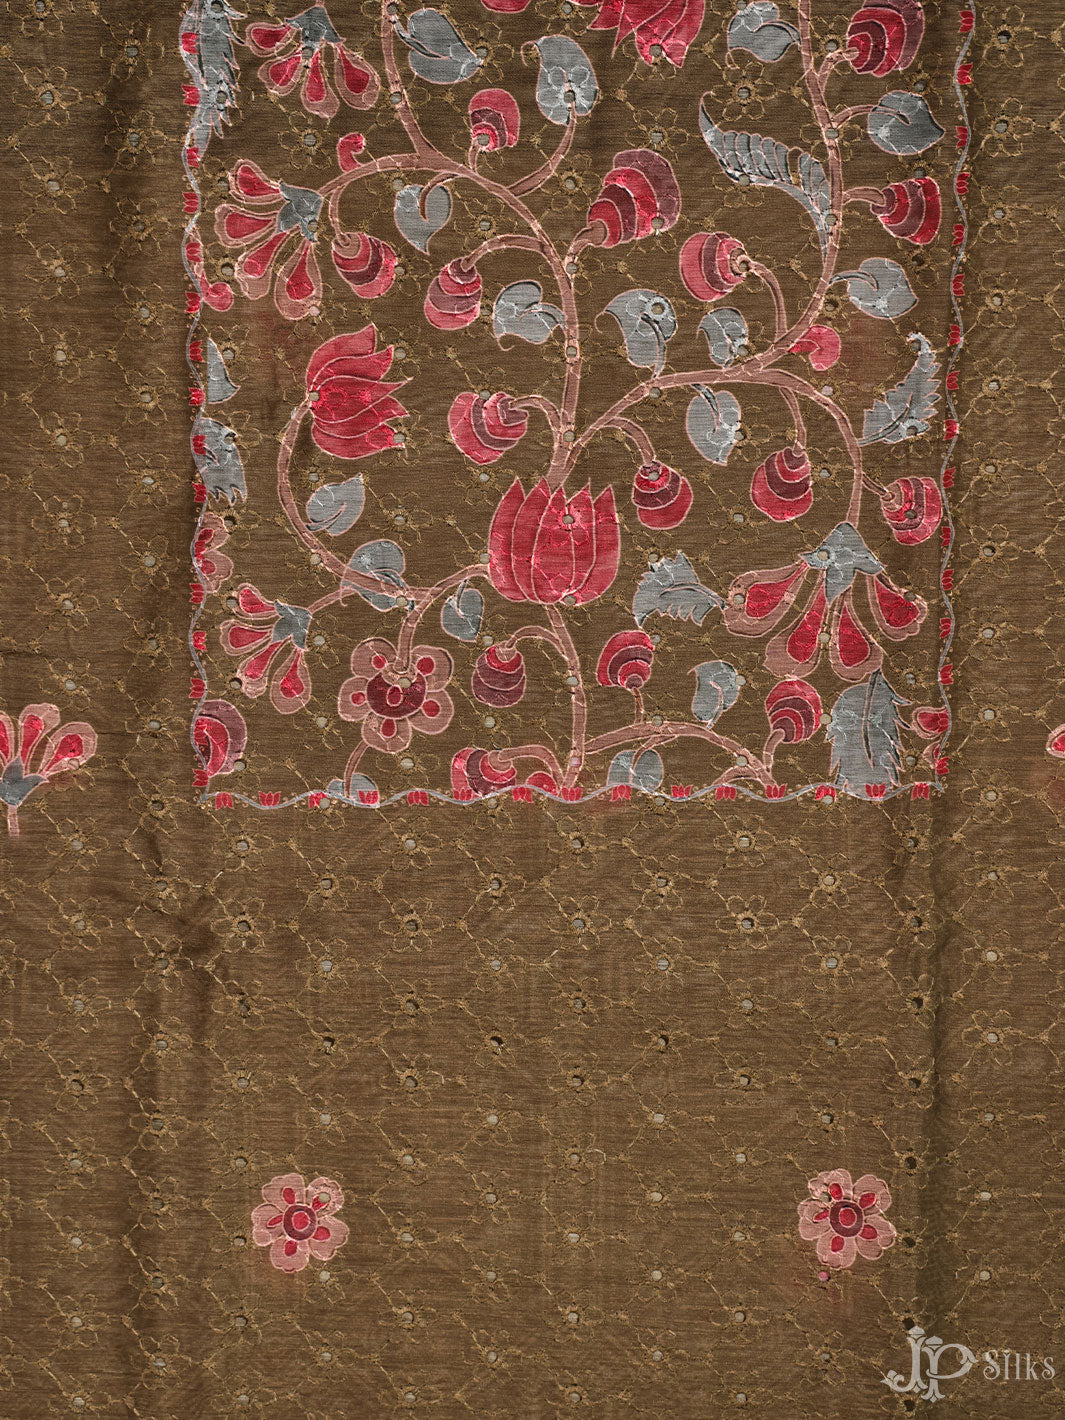 Brown Tussar Unstiched Chudidhar Material - E1902 - View 3